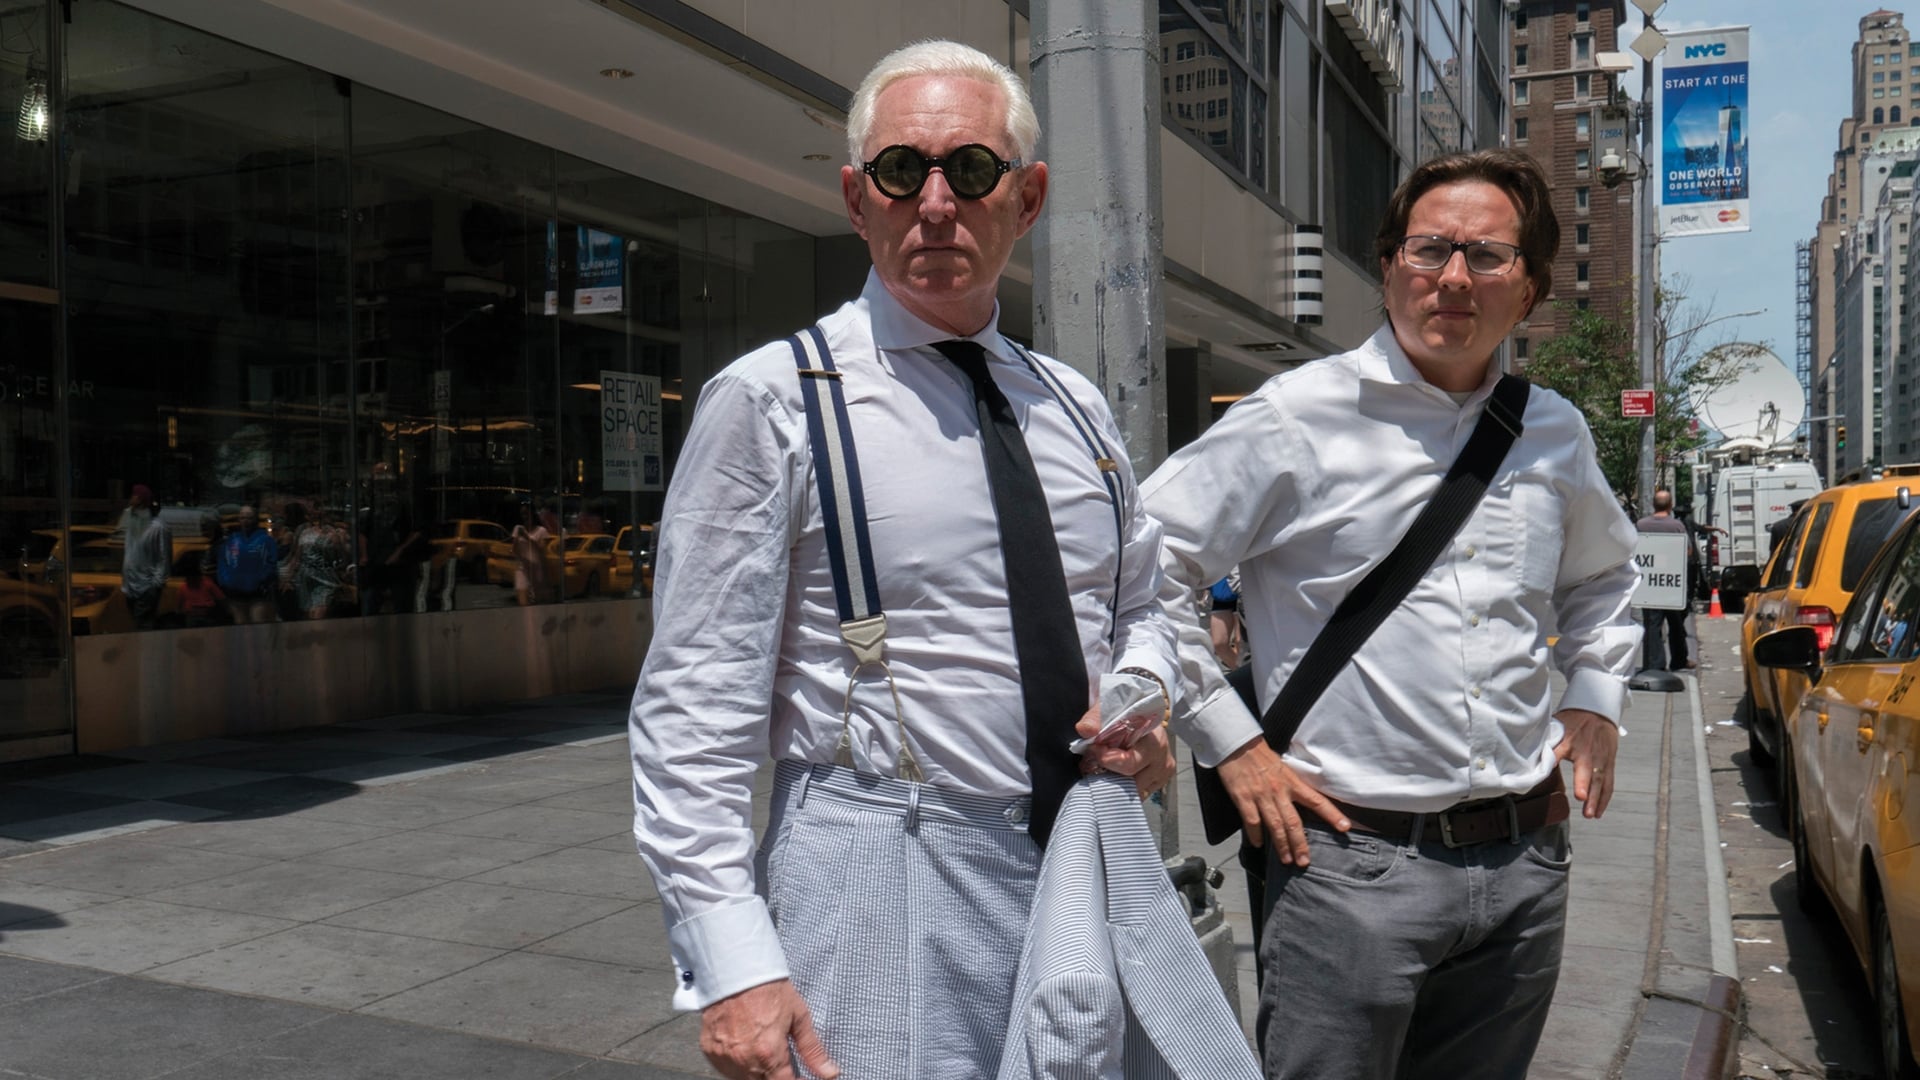 Get Me Roger Stone 2017